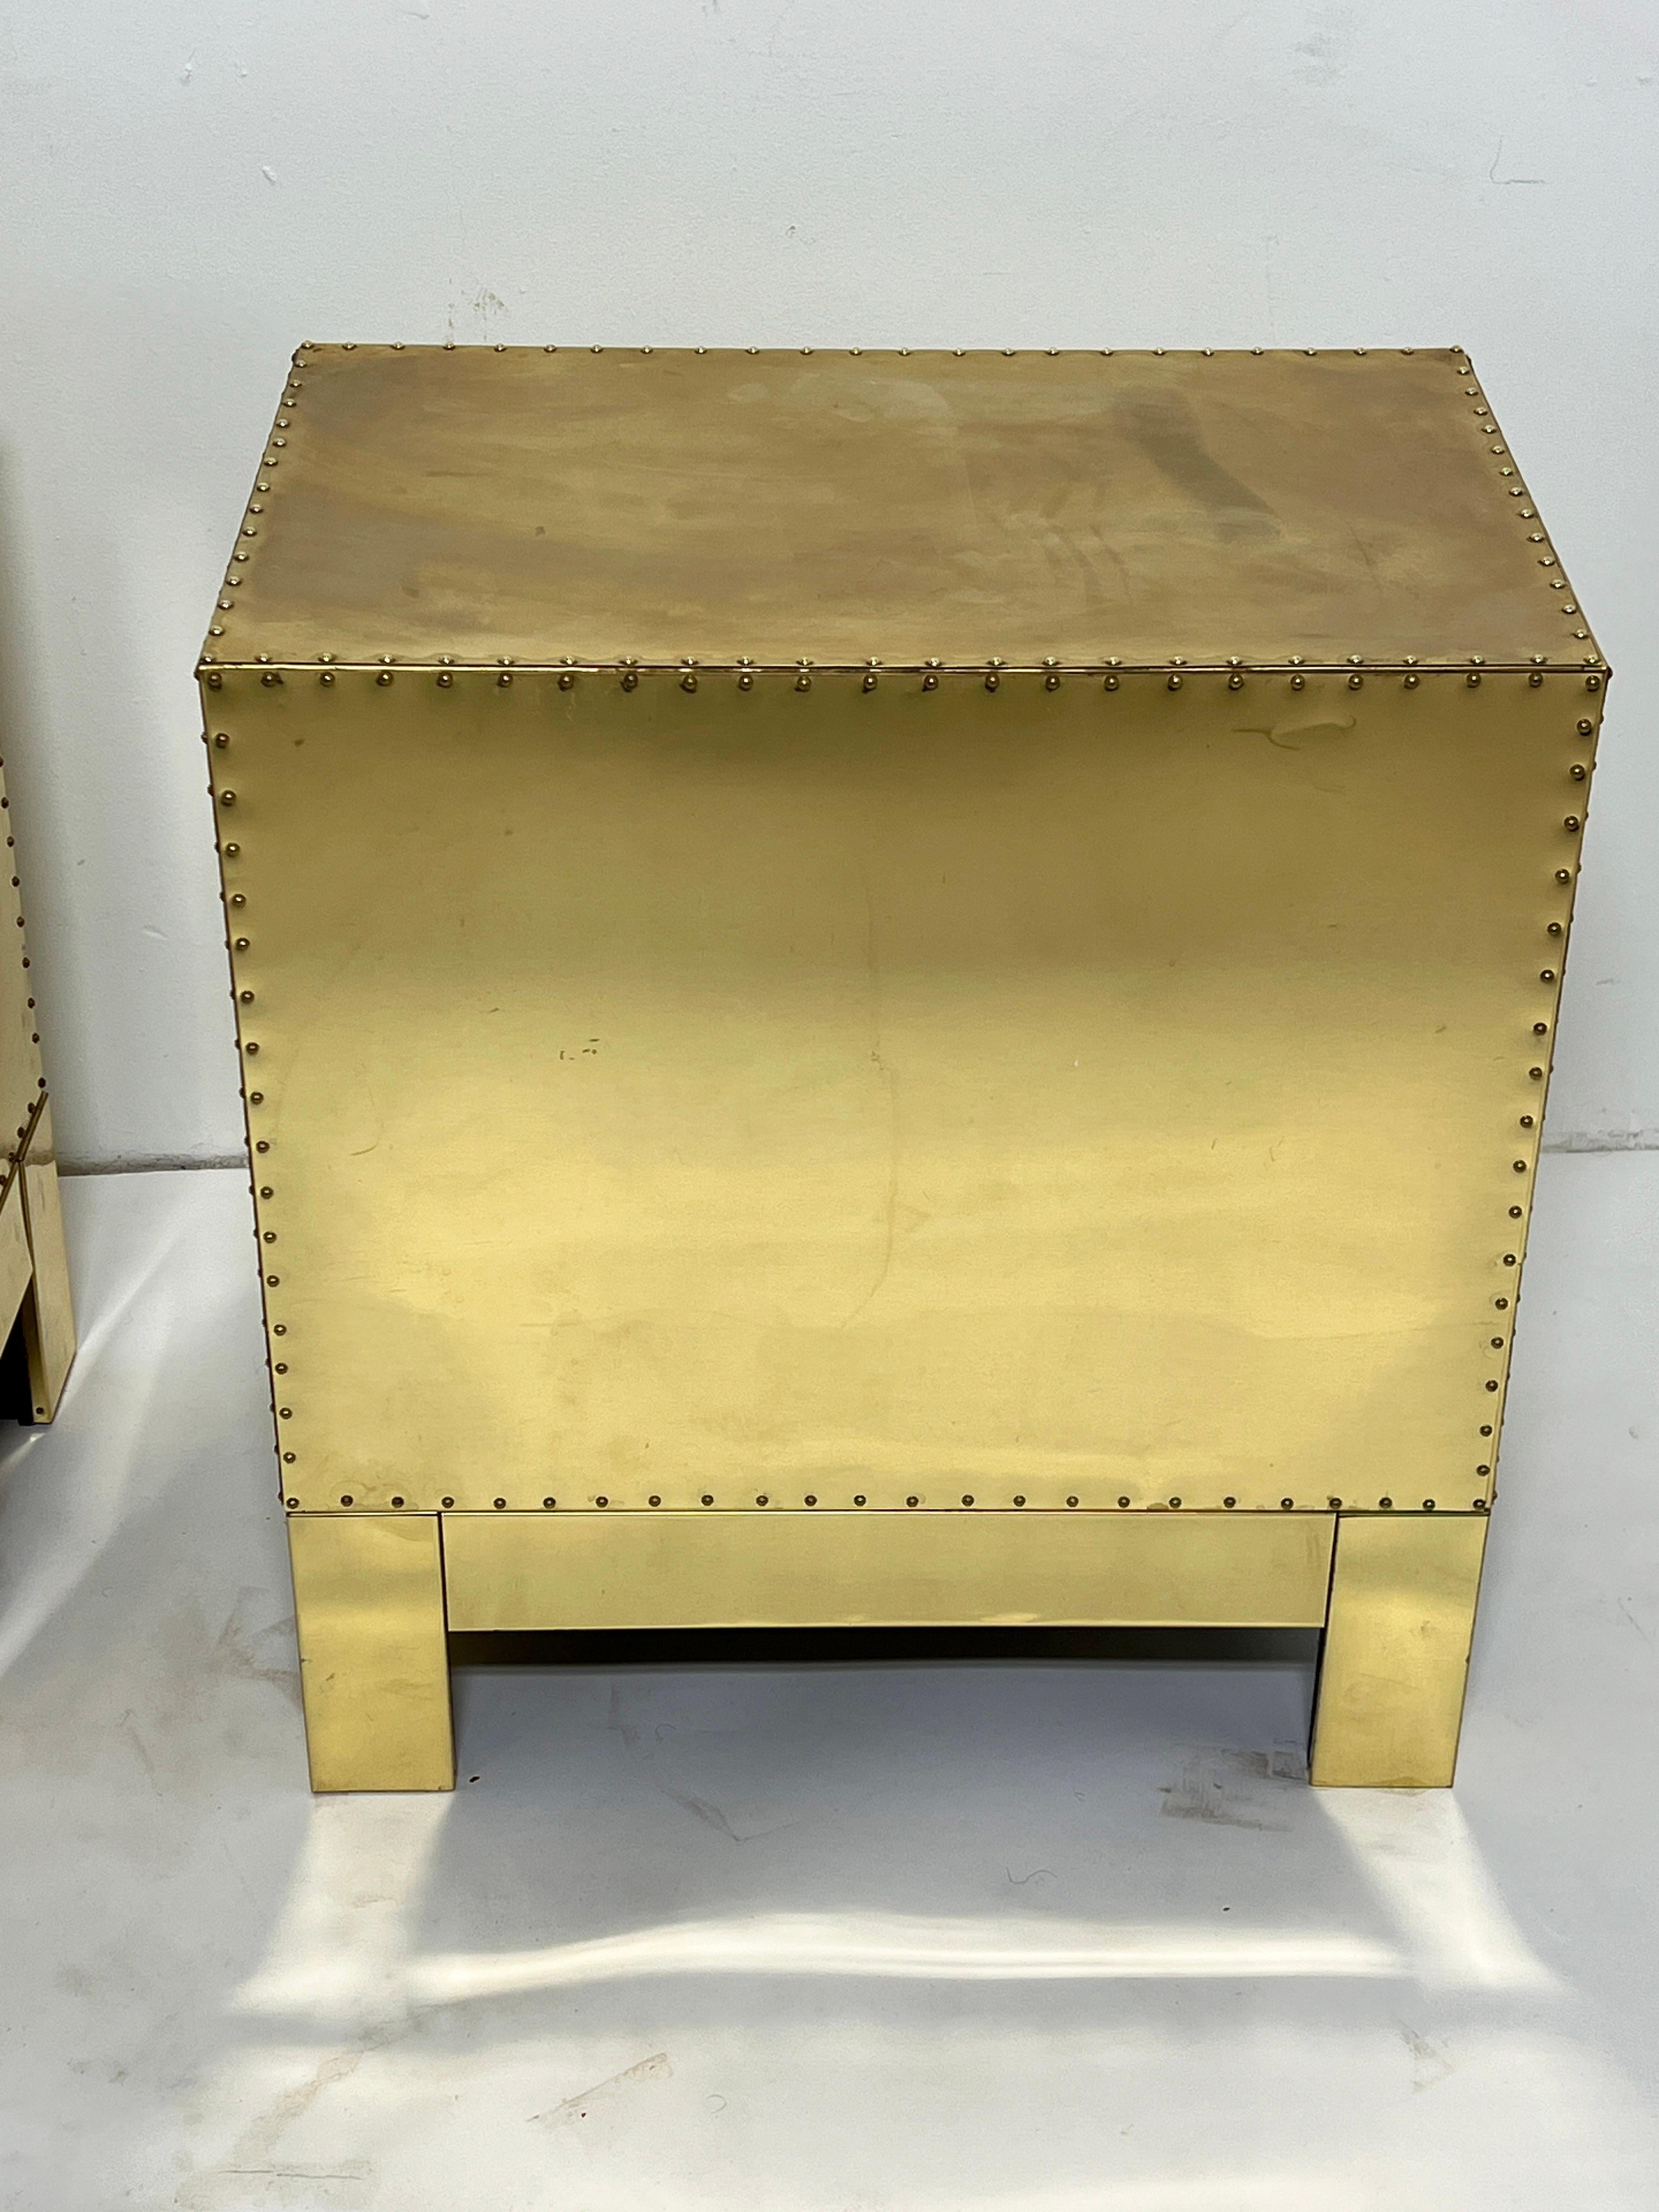 Pair of Three Drawer Brass Clad Chests in Manner of Sarreid, Circa 1970s For Sale 6